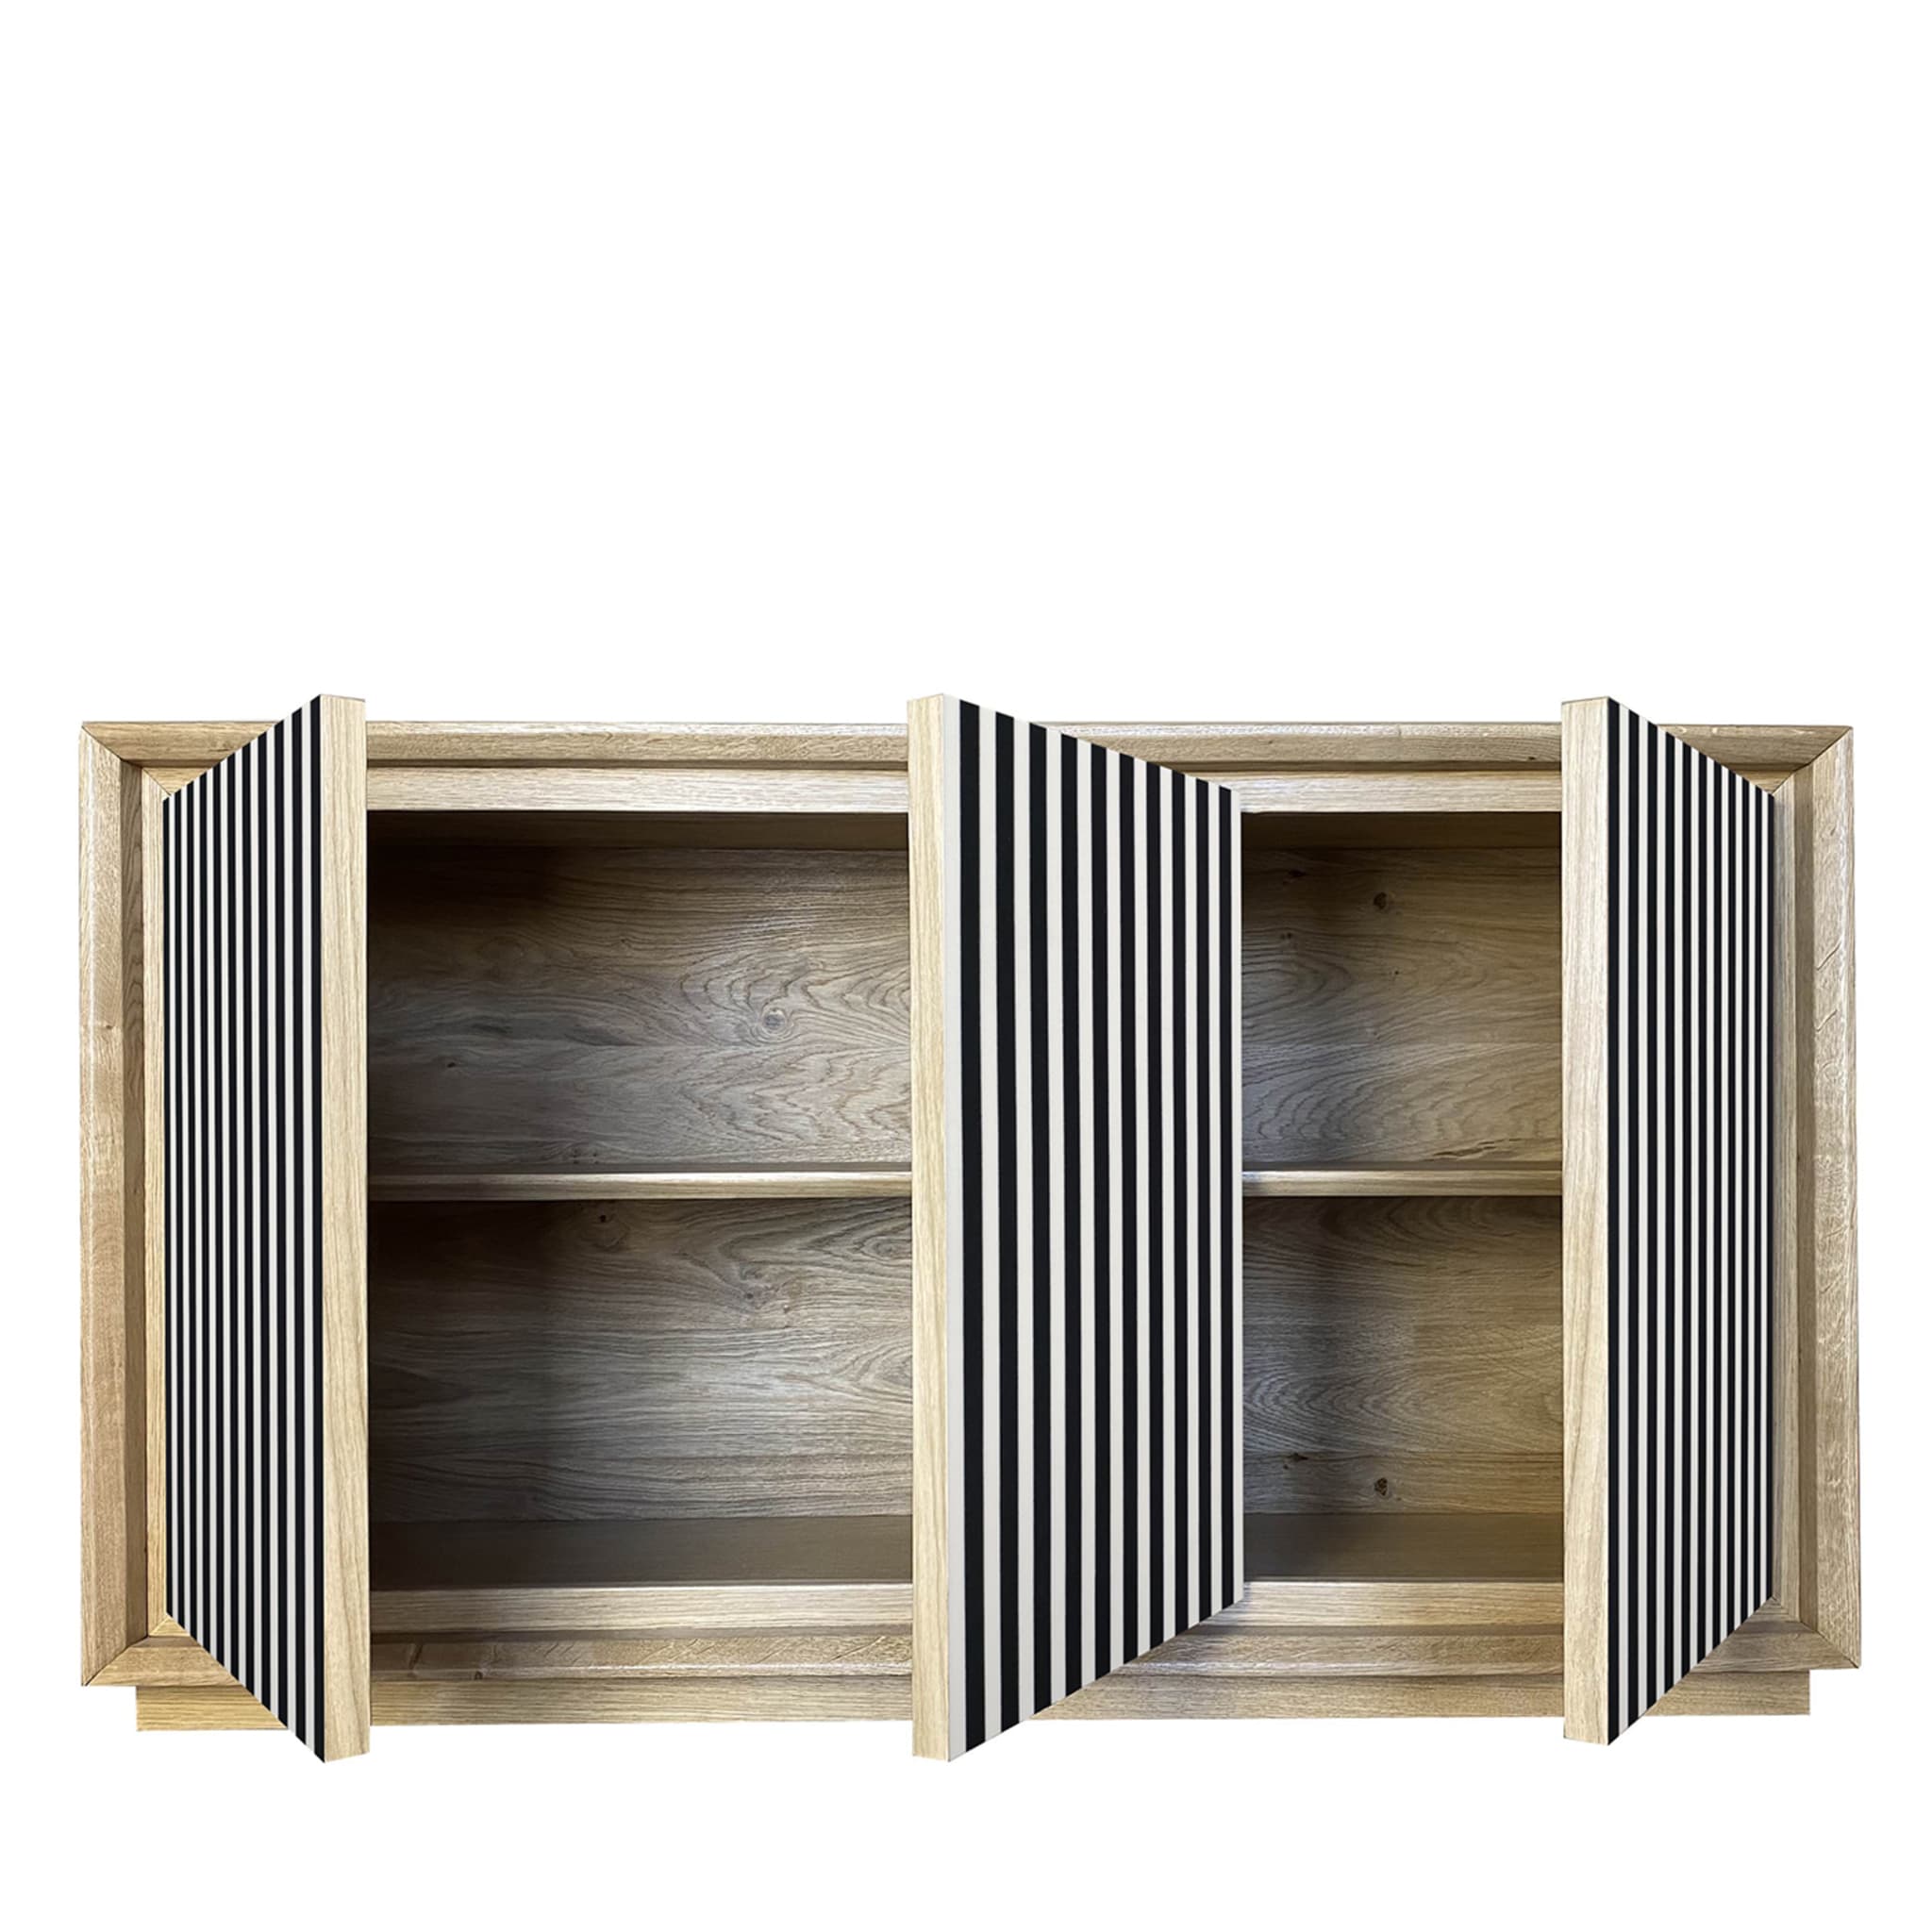 Fuga Strisce Due 3-Door Black-And-White Sideboard by M. Meccani - Alternative view 4